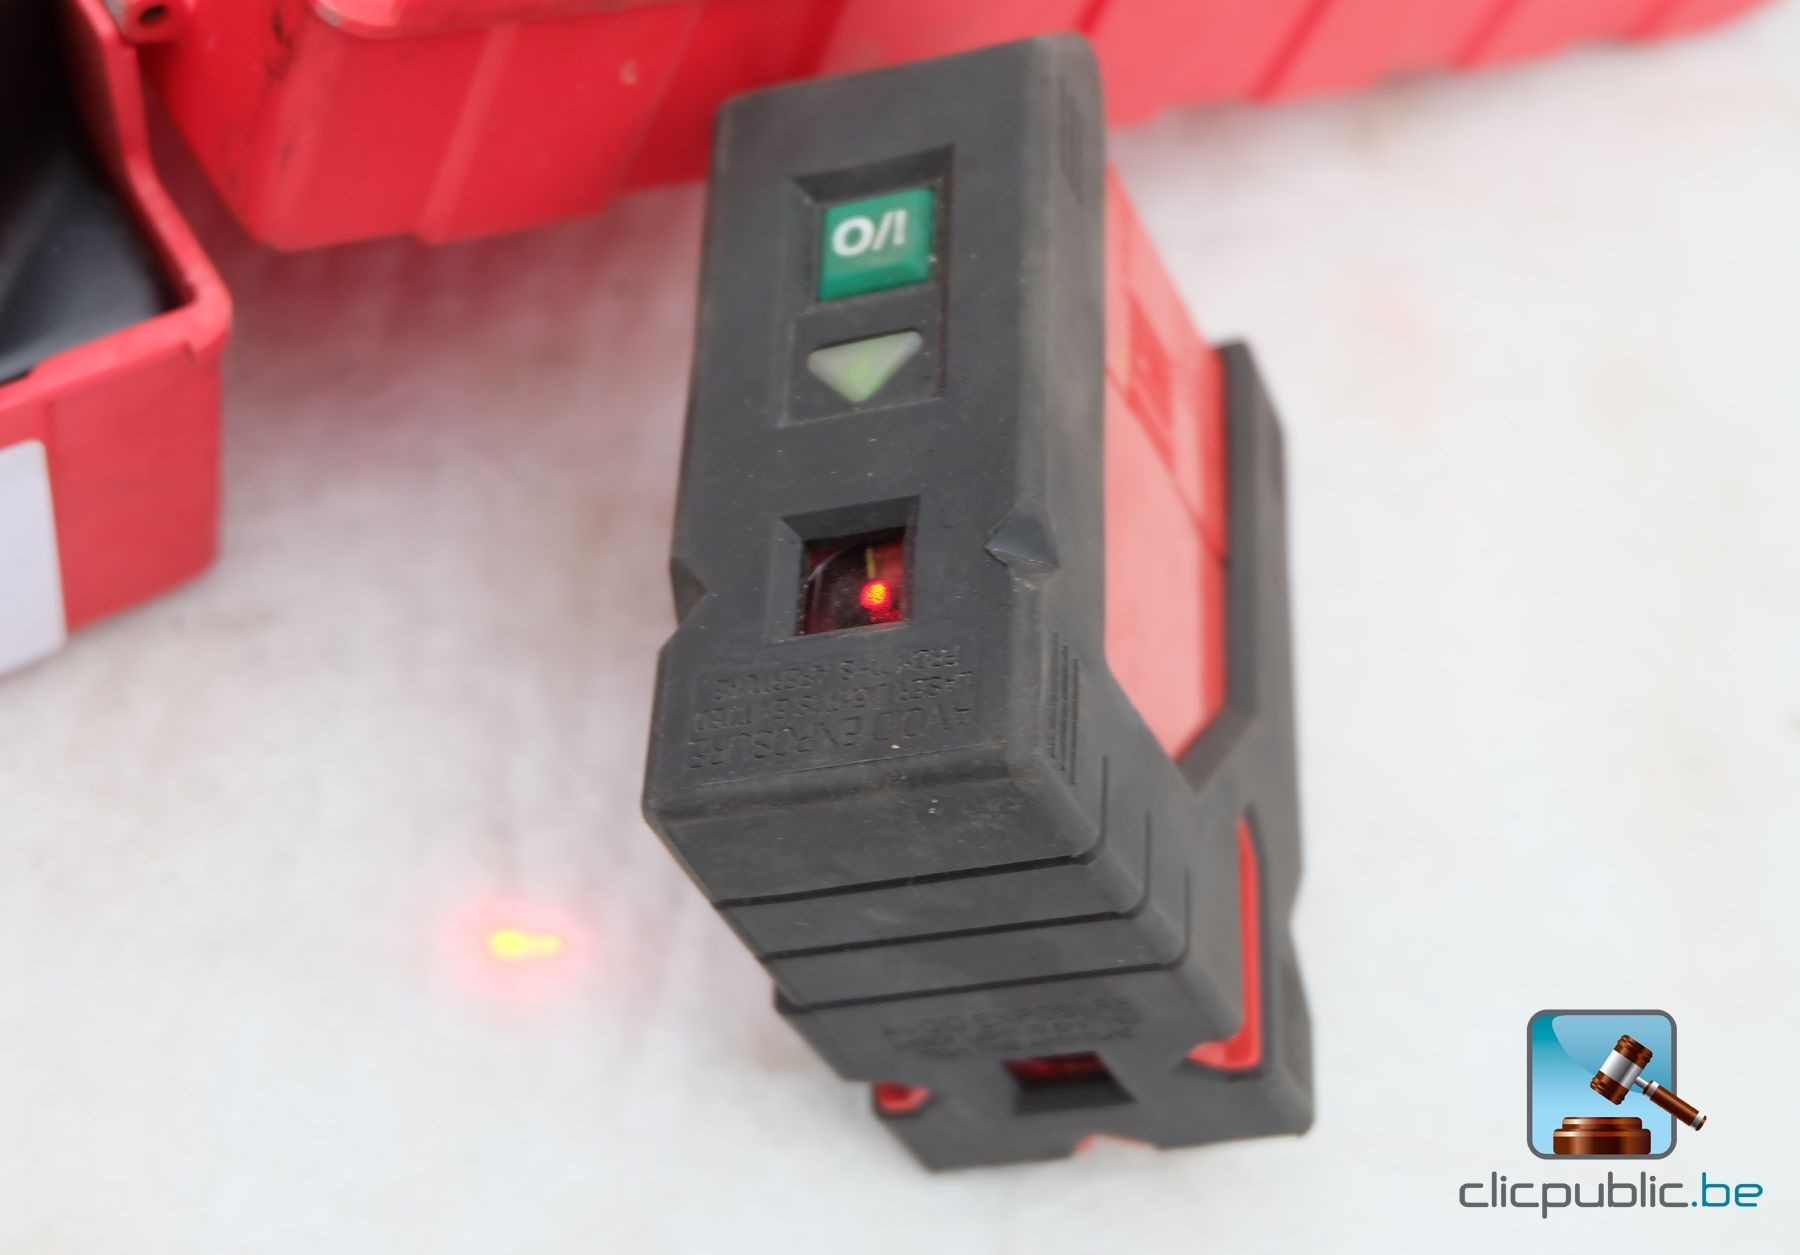 Laser levels HILTI multidirectionnel - Clicpublic.be, online auctions in 1  click.